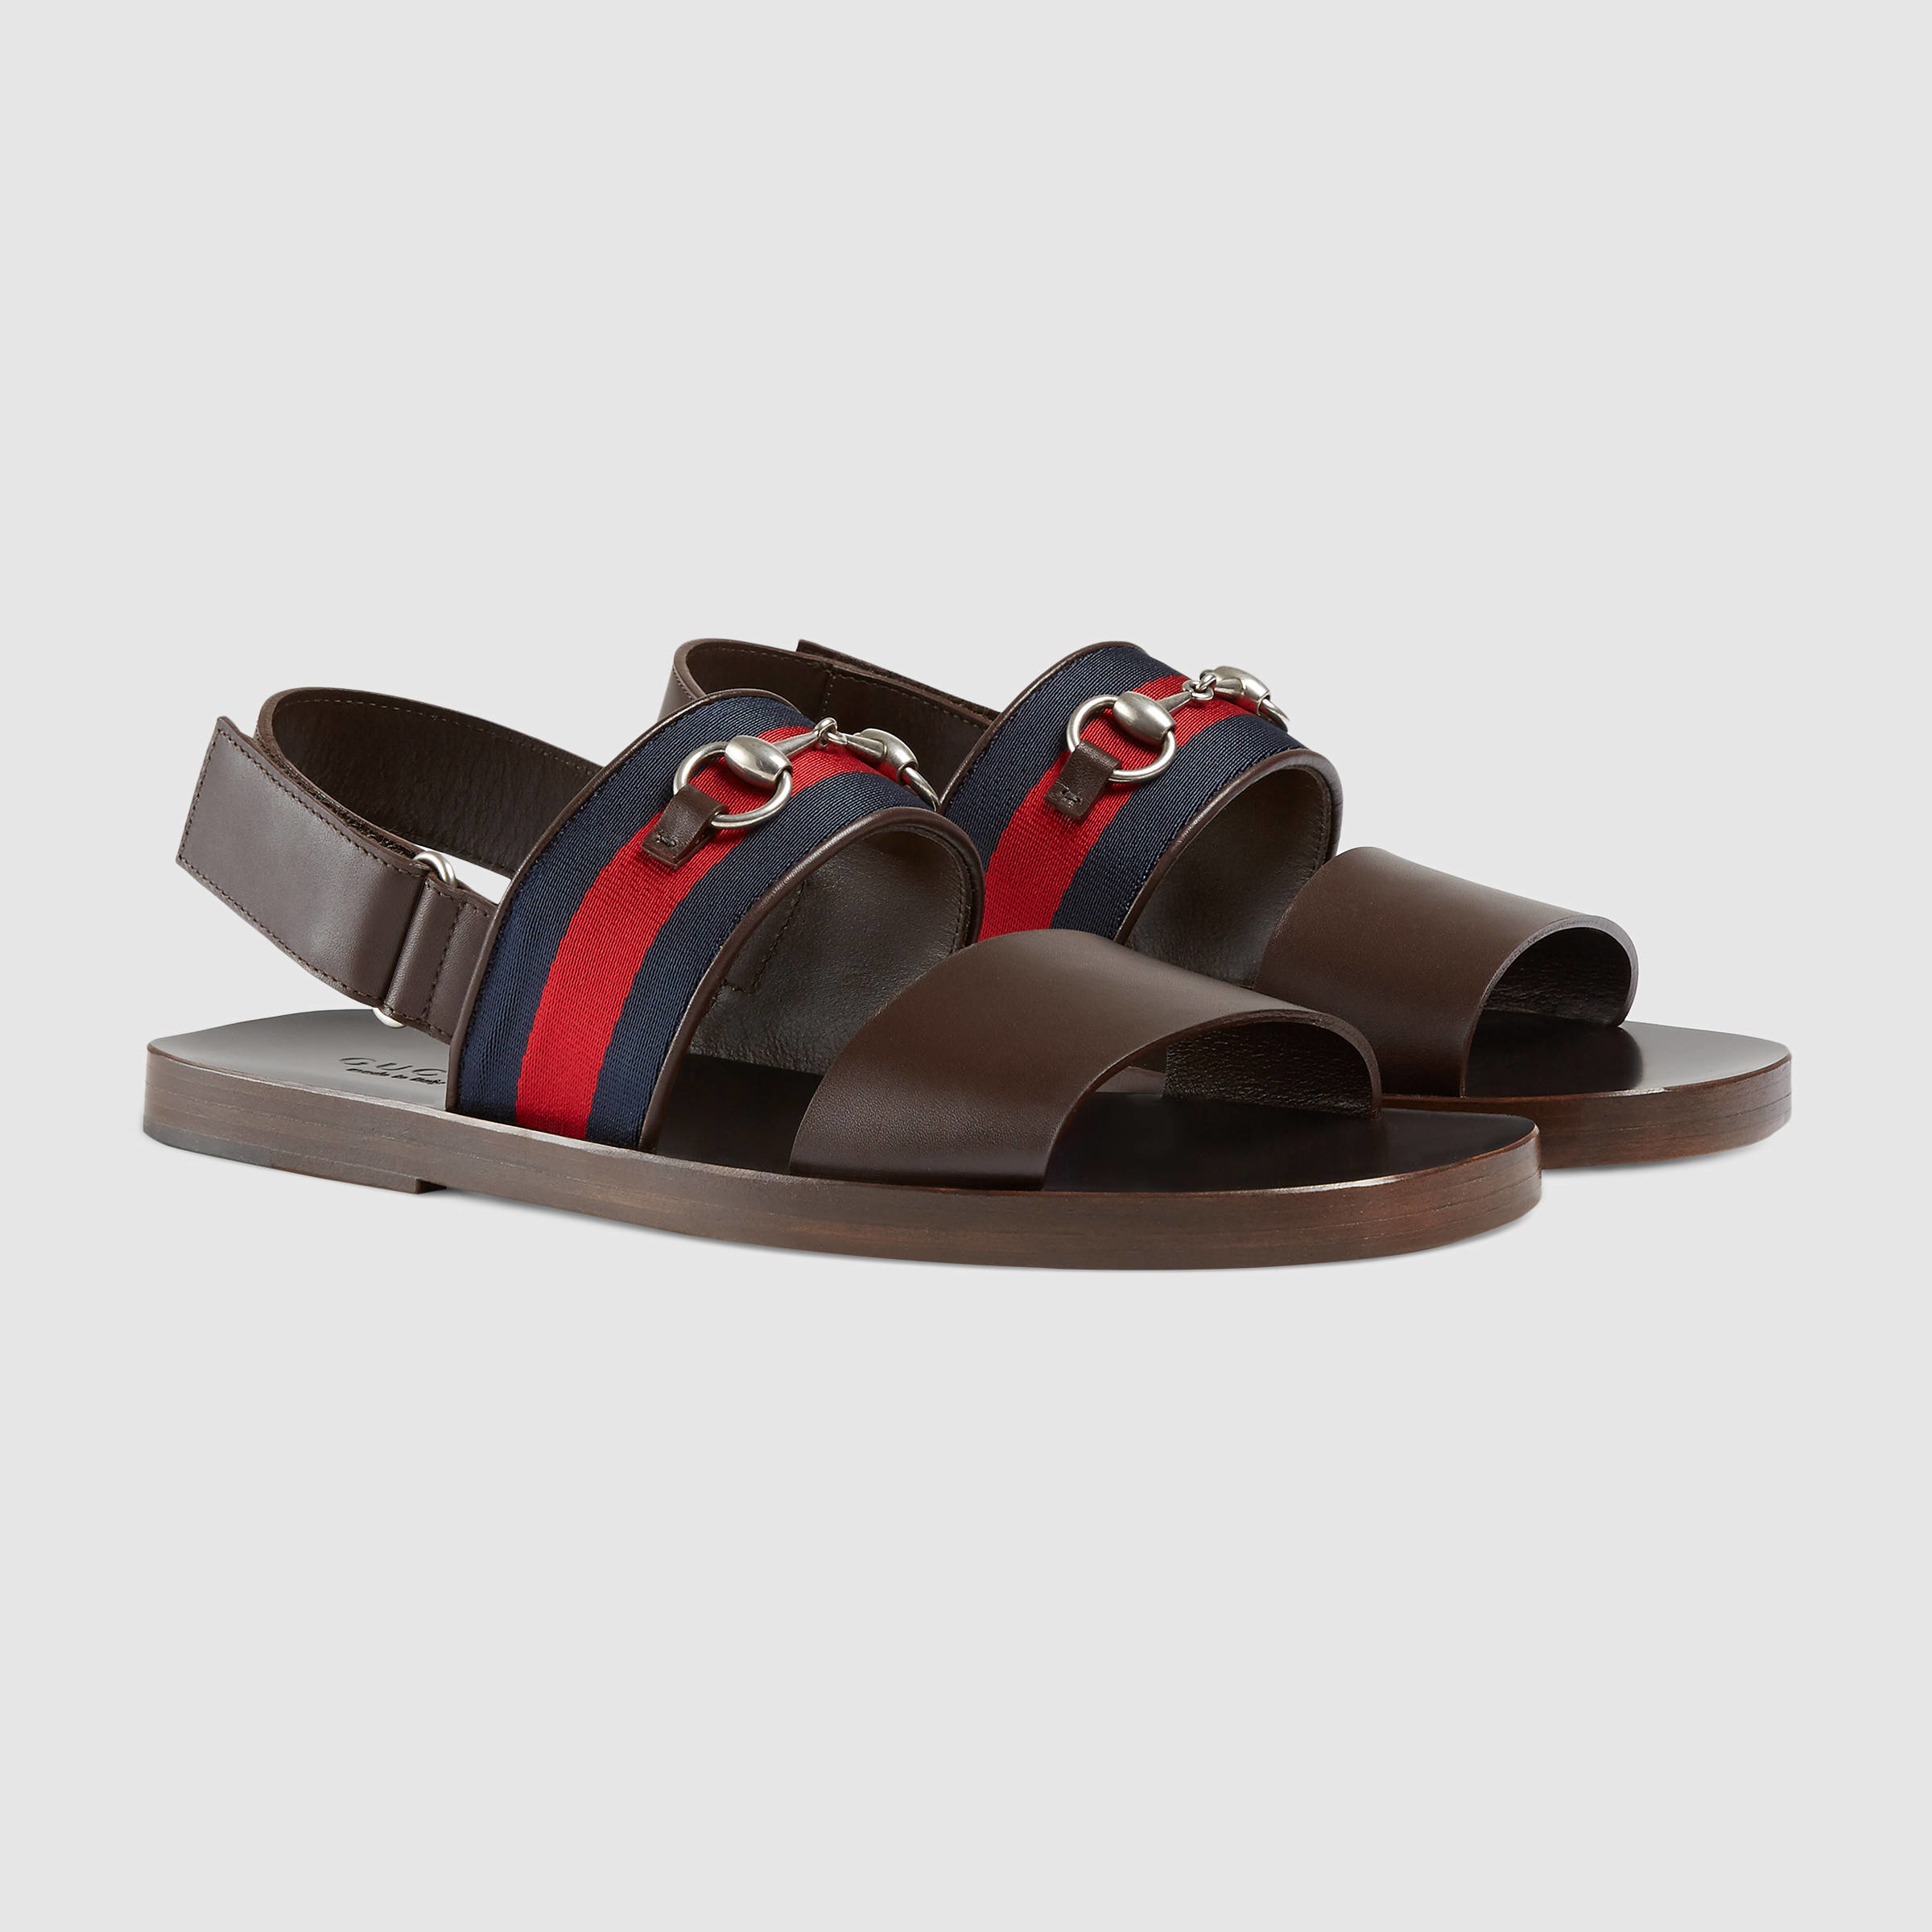 Gucci Leather Web Sandal in Brown Leather (Brown) for Men - Lyst